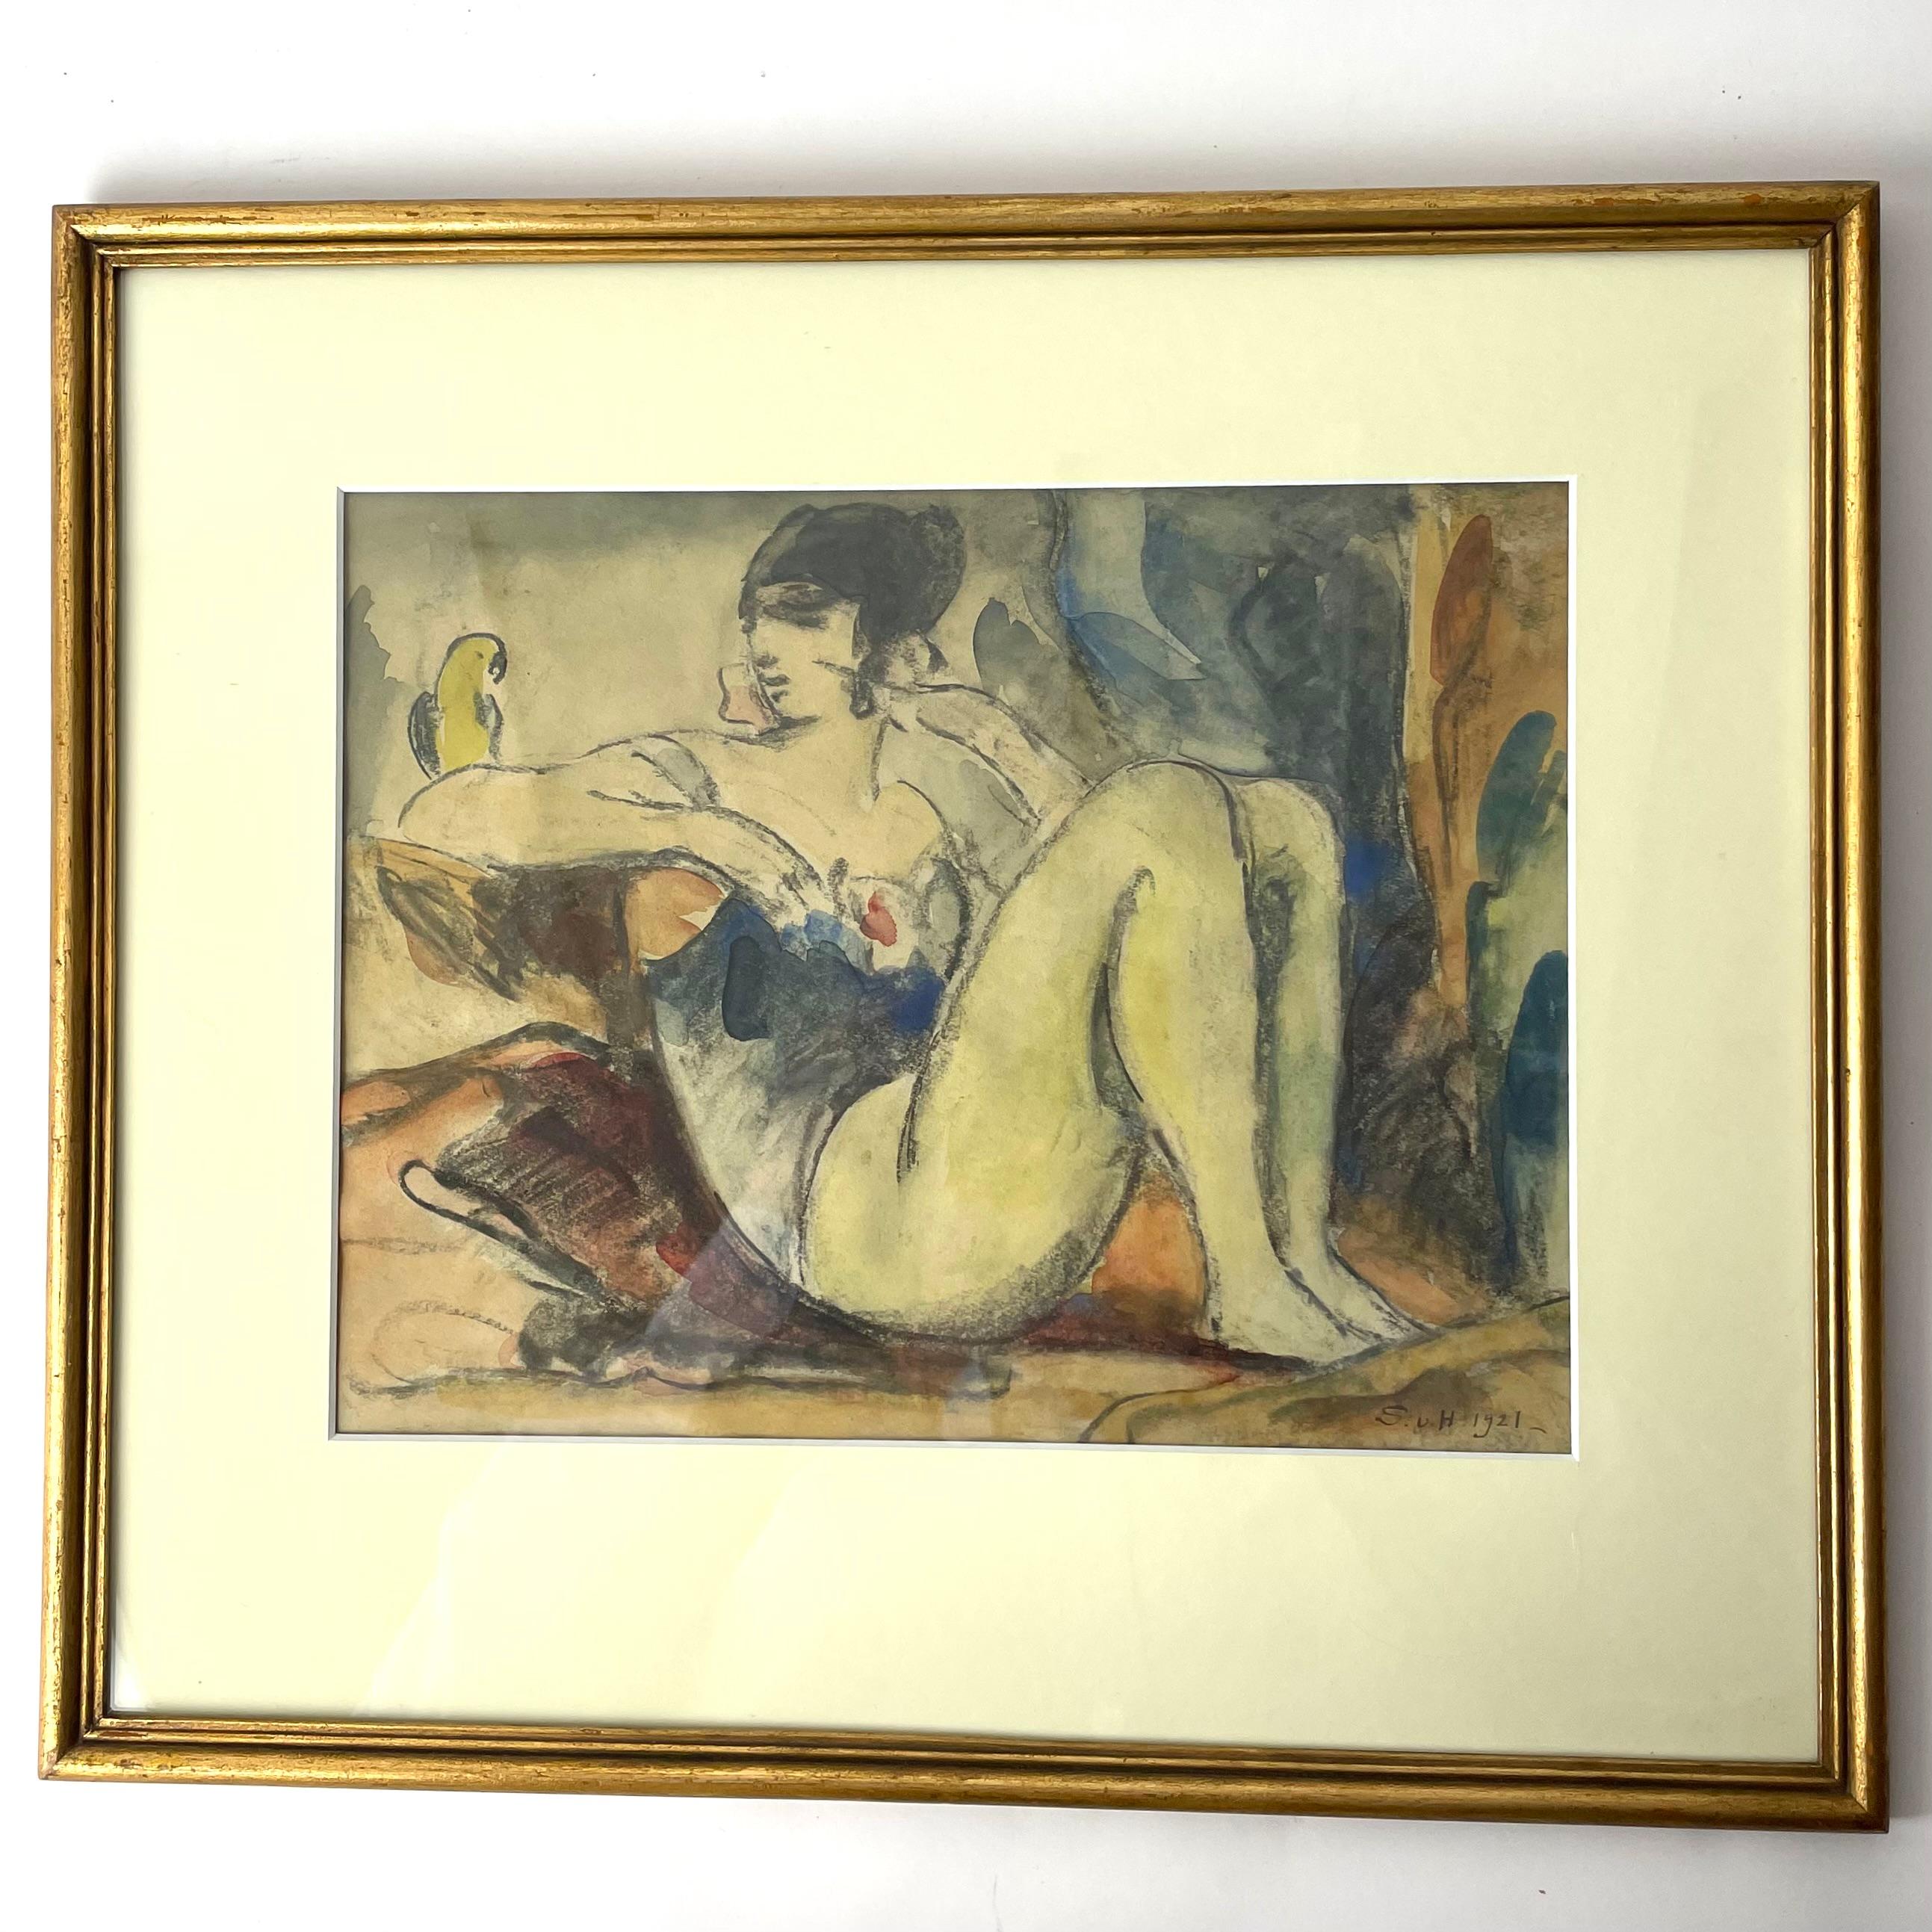 Beautiful Watercolor painting on paper by the famous Swedish artist Gösta von Hennigs (1866-1941). The painting is called ”Fågeltämjerskan” in Swedish which means ”Bird tamer” in English. Signed  and dated 1921 in a very typical 1920s style.

Gösta